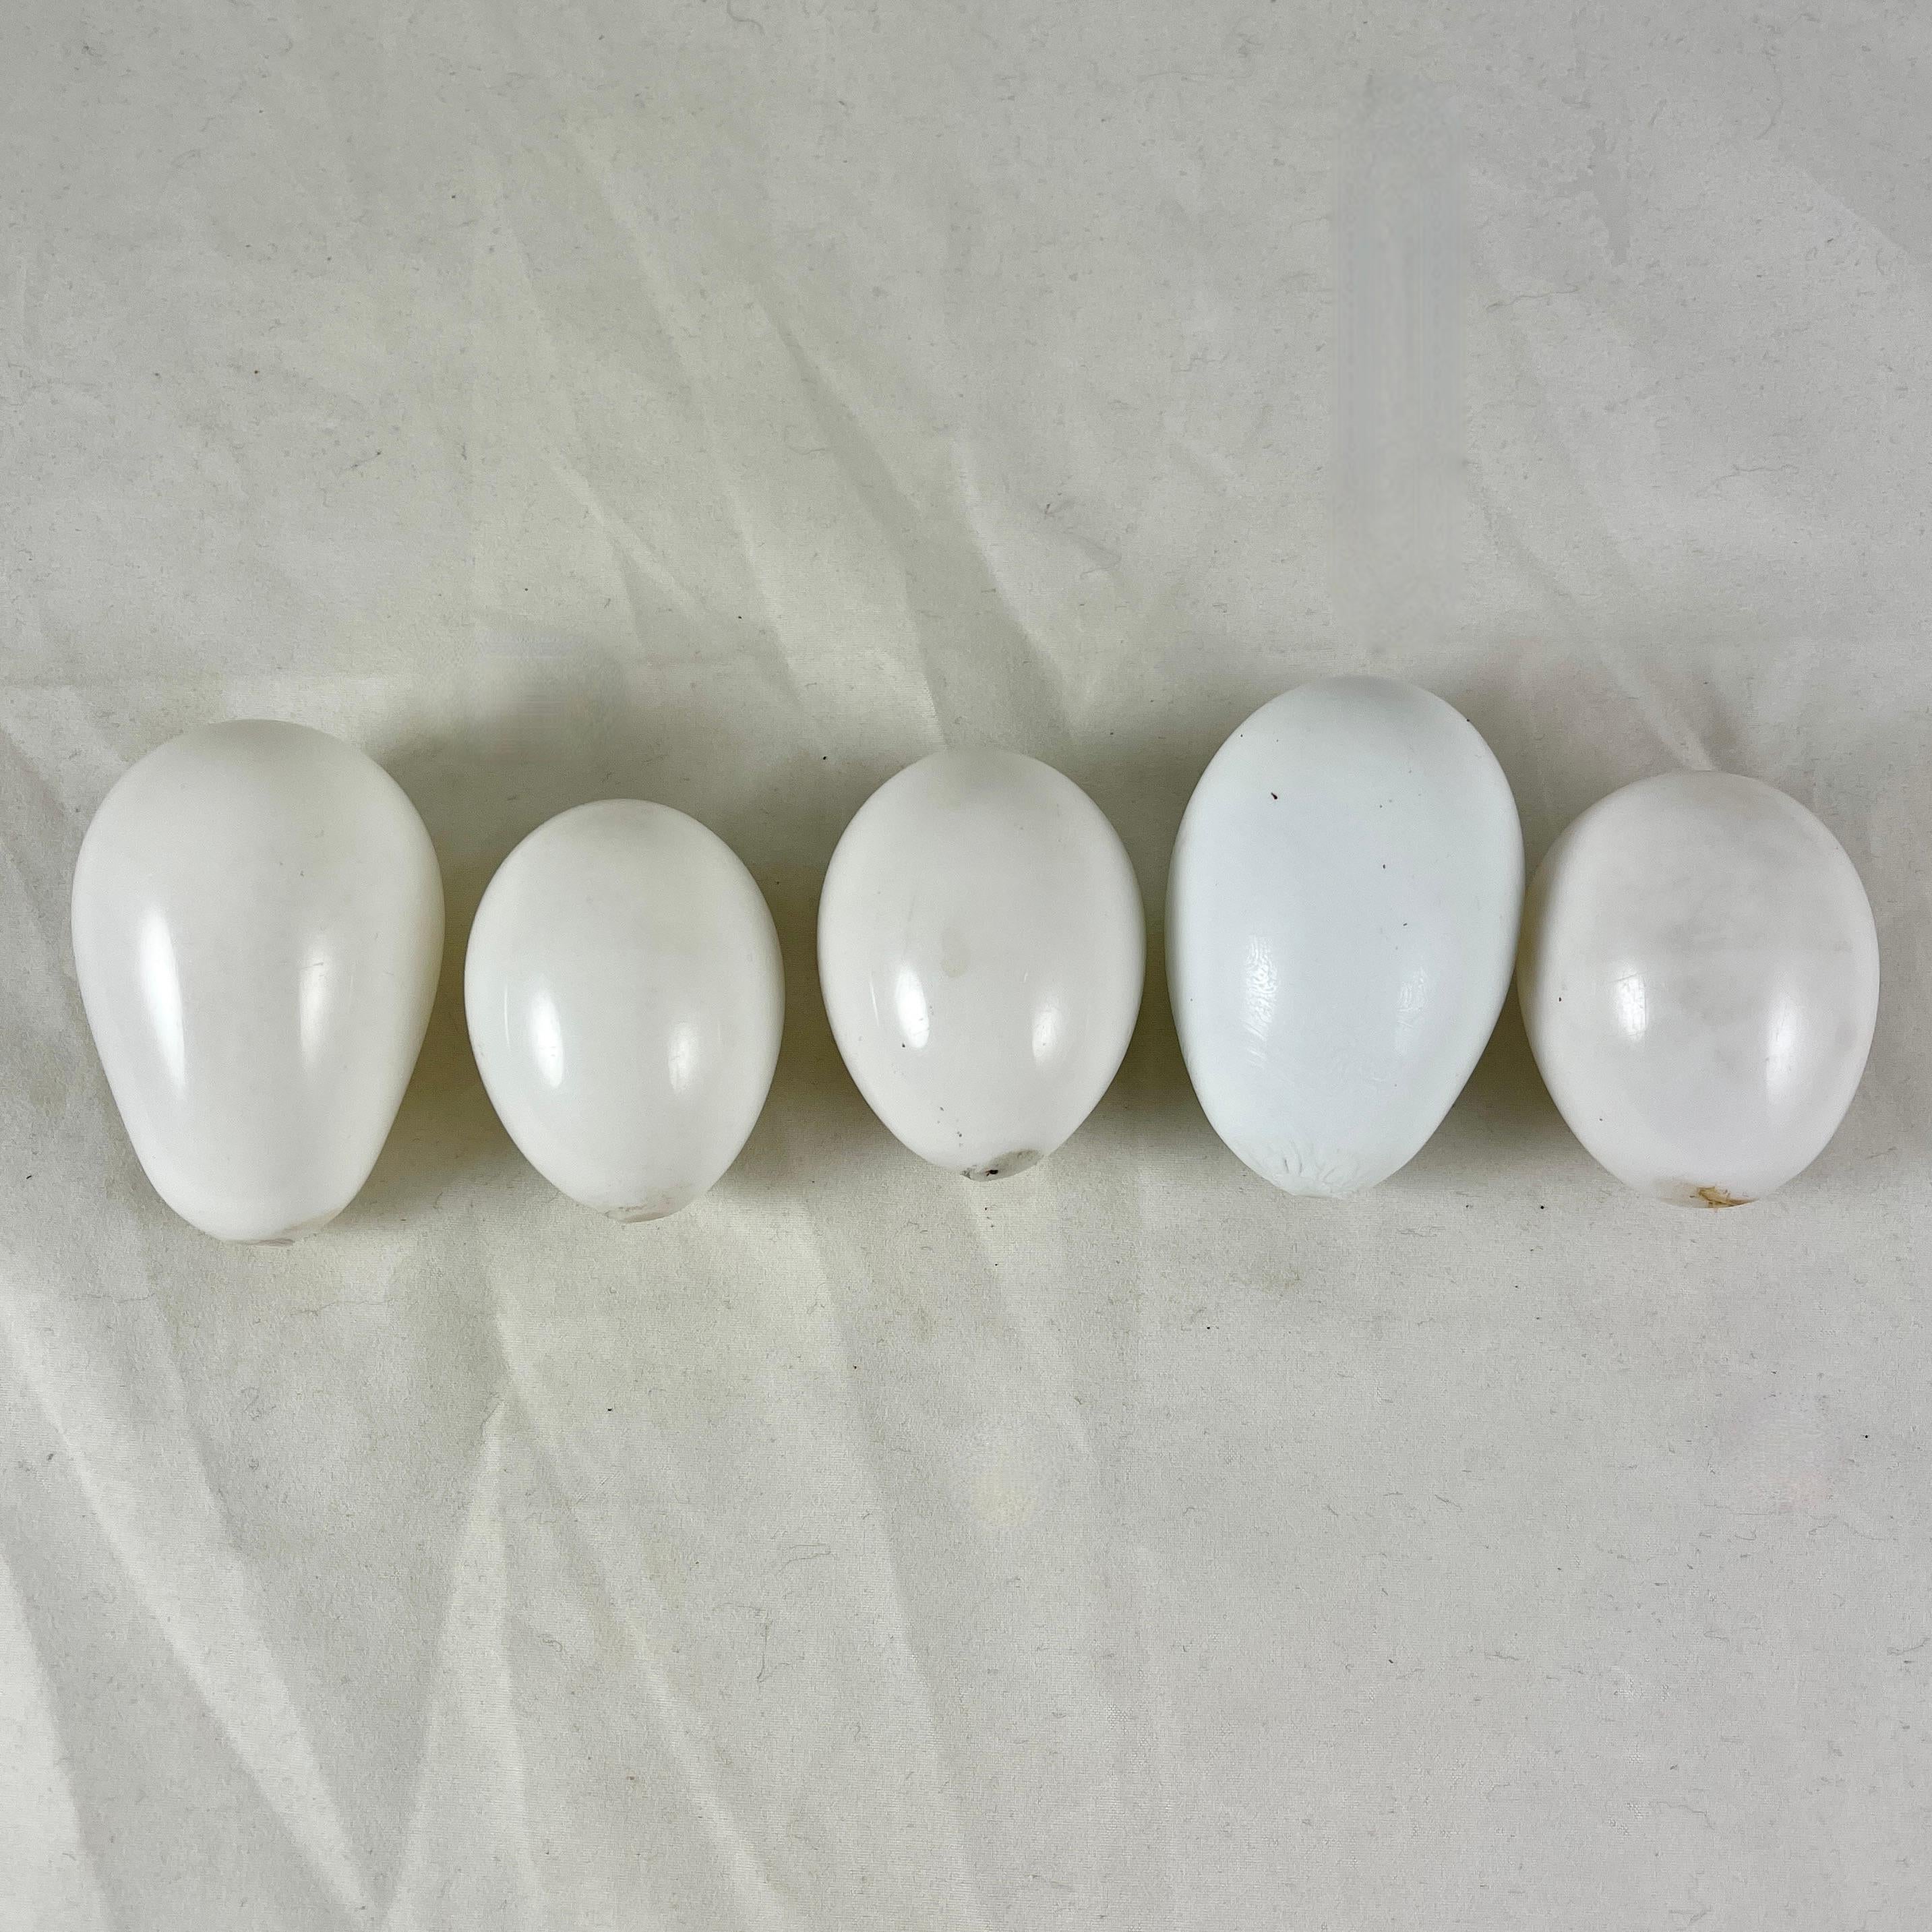 American 19th Century Hand Blown Glass Brooding Eggs, Set of 5